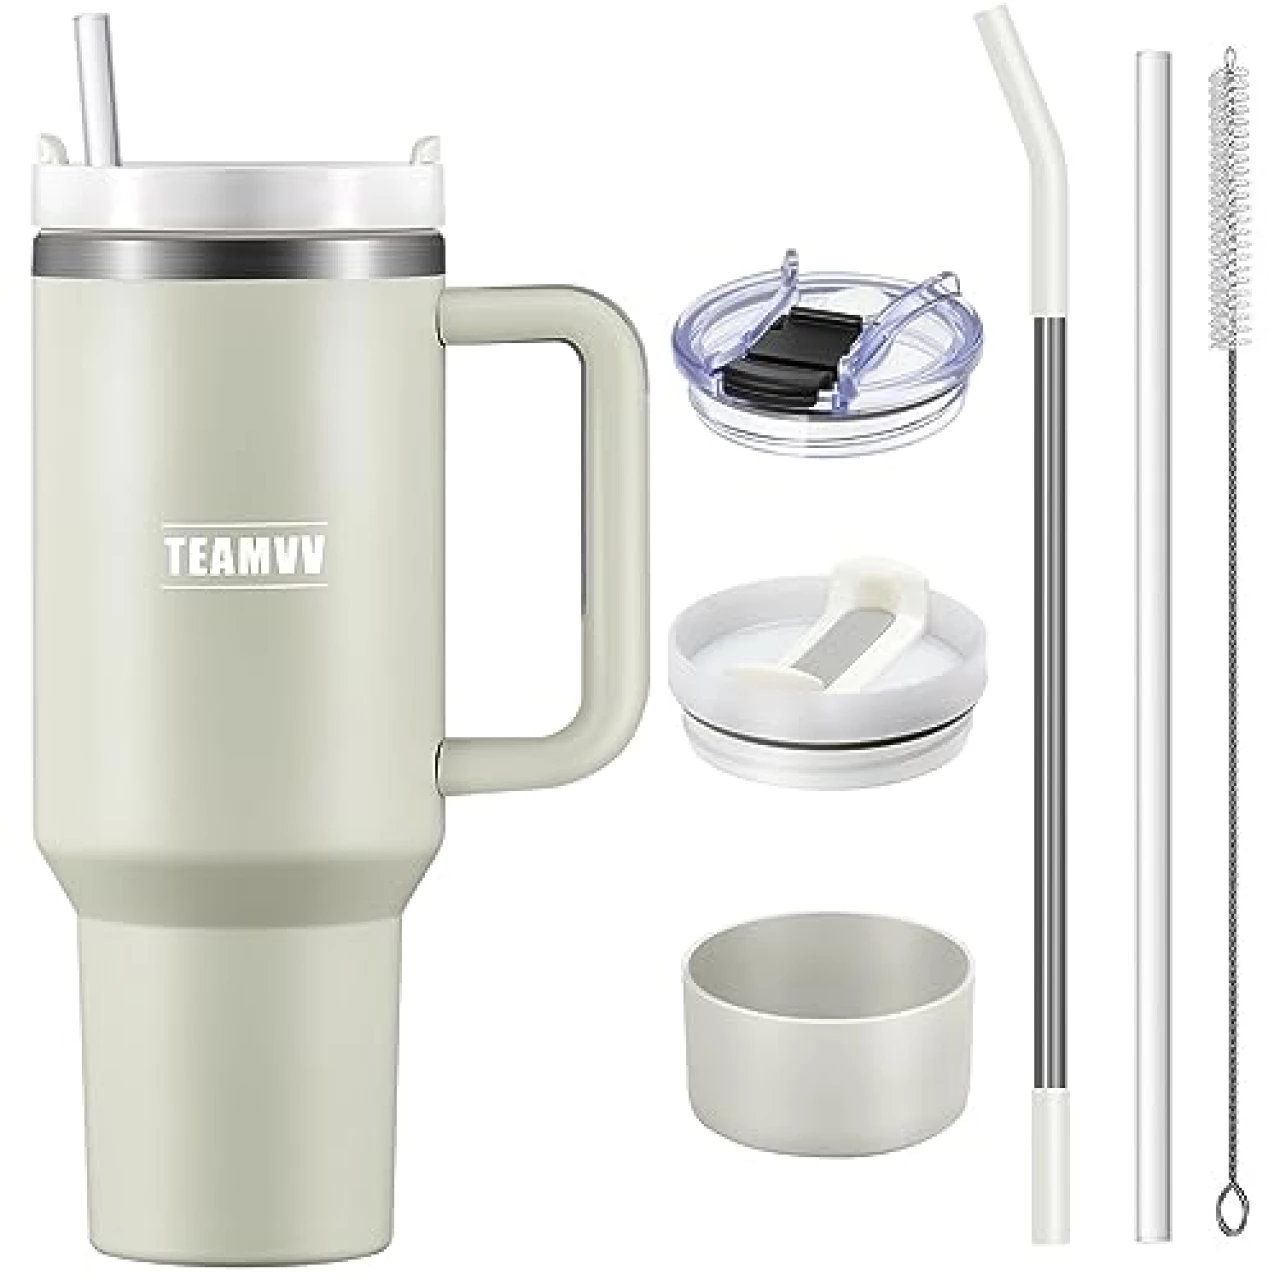 TEAMVV 40 oz Tumbler with Handle and Straw Stainless Steel Vacuum Insulated Tumbler Tea or Iced Coffee Mug for Hot or Cold Beverages 40 oz Tumbler with Handle(Dune)